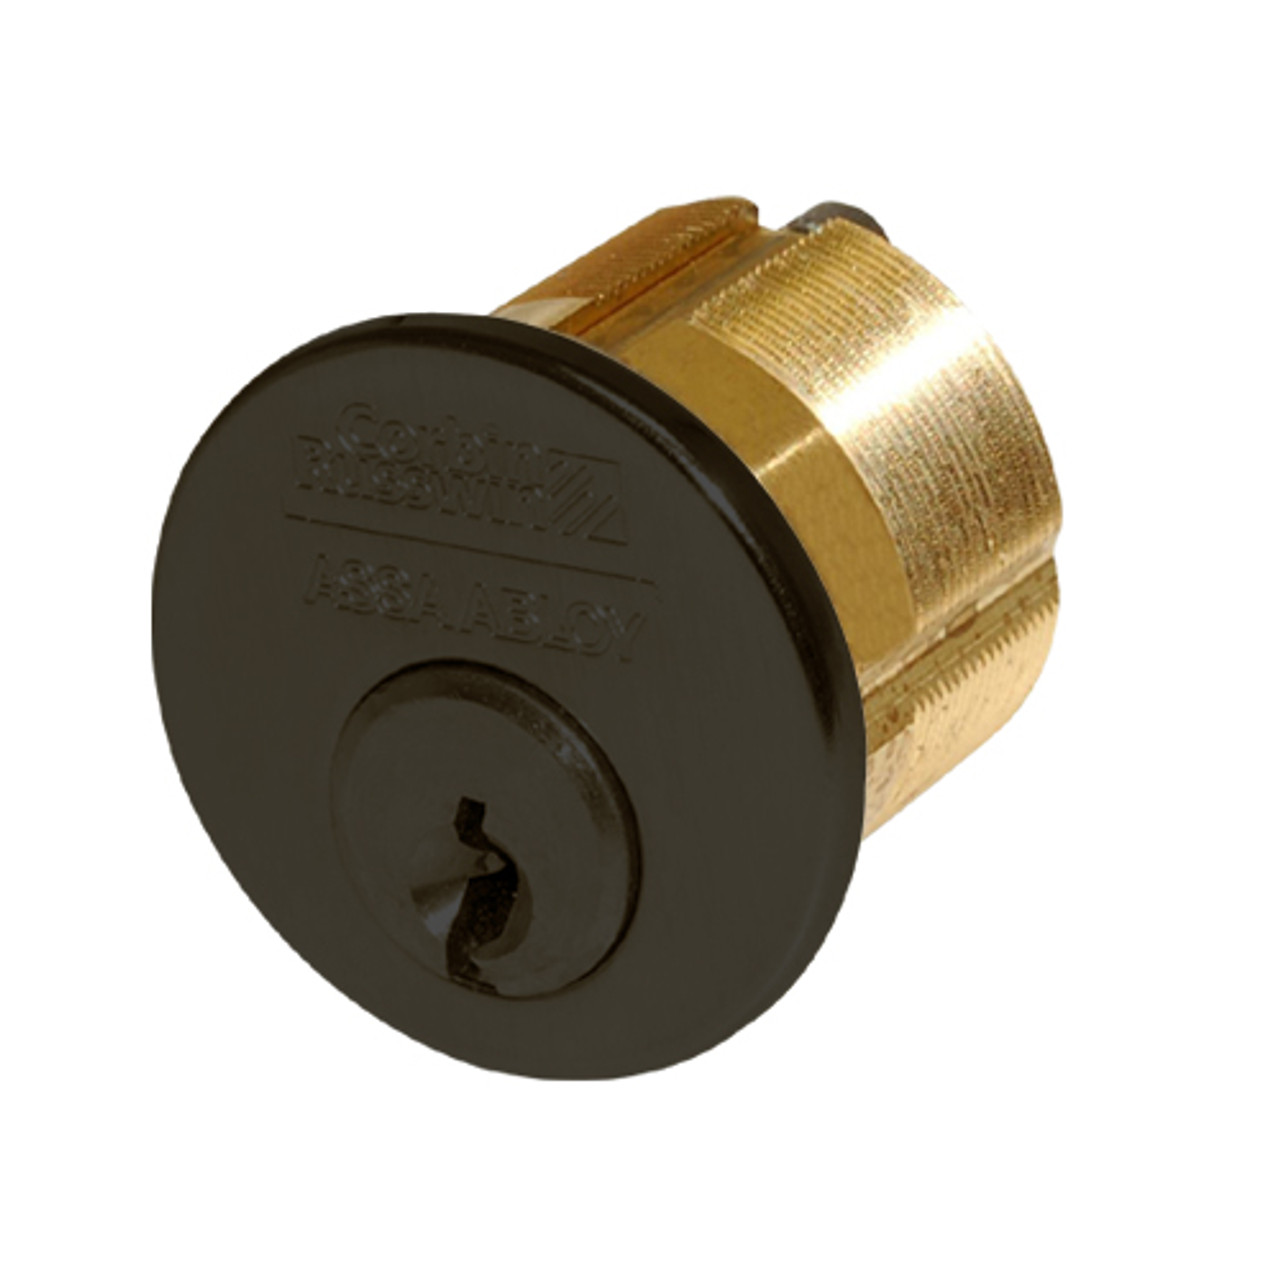 CR1000-118-A01-6-N2-613 Corbin Conventional Mortise Cylinder for Mortise Lock and DL3000 Deadlocks with Cloverleaf Cam in Oil Rubbed Bronze Finish